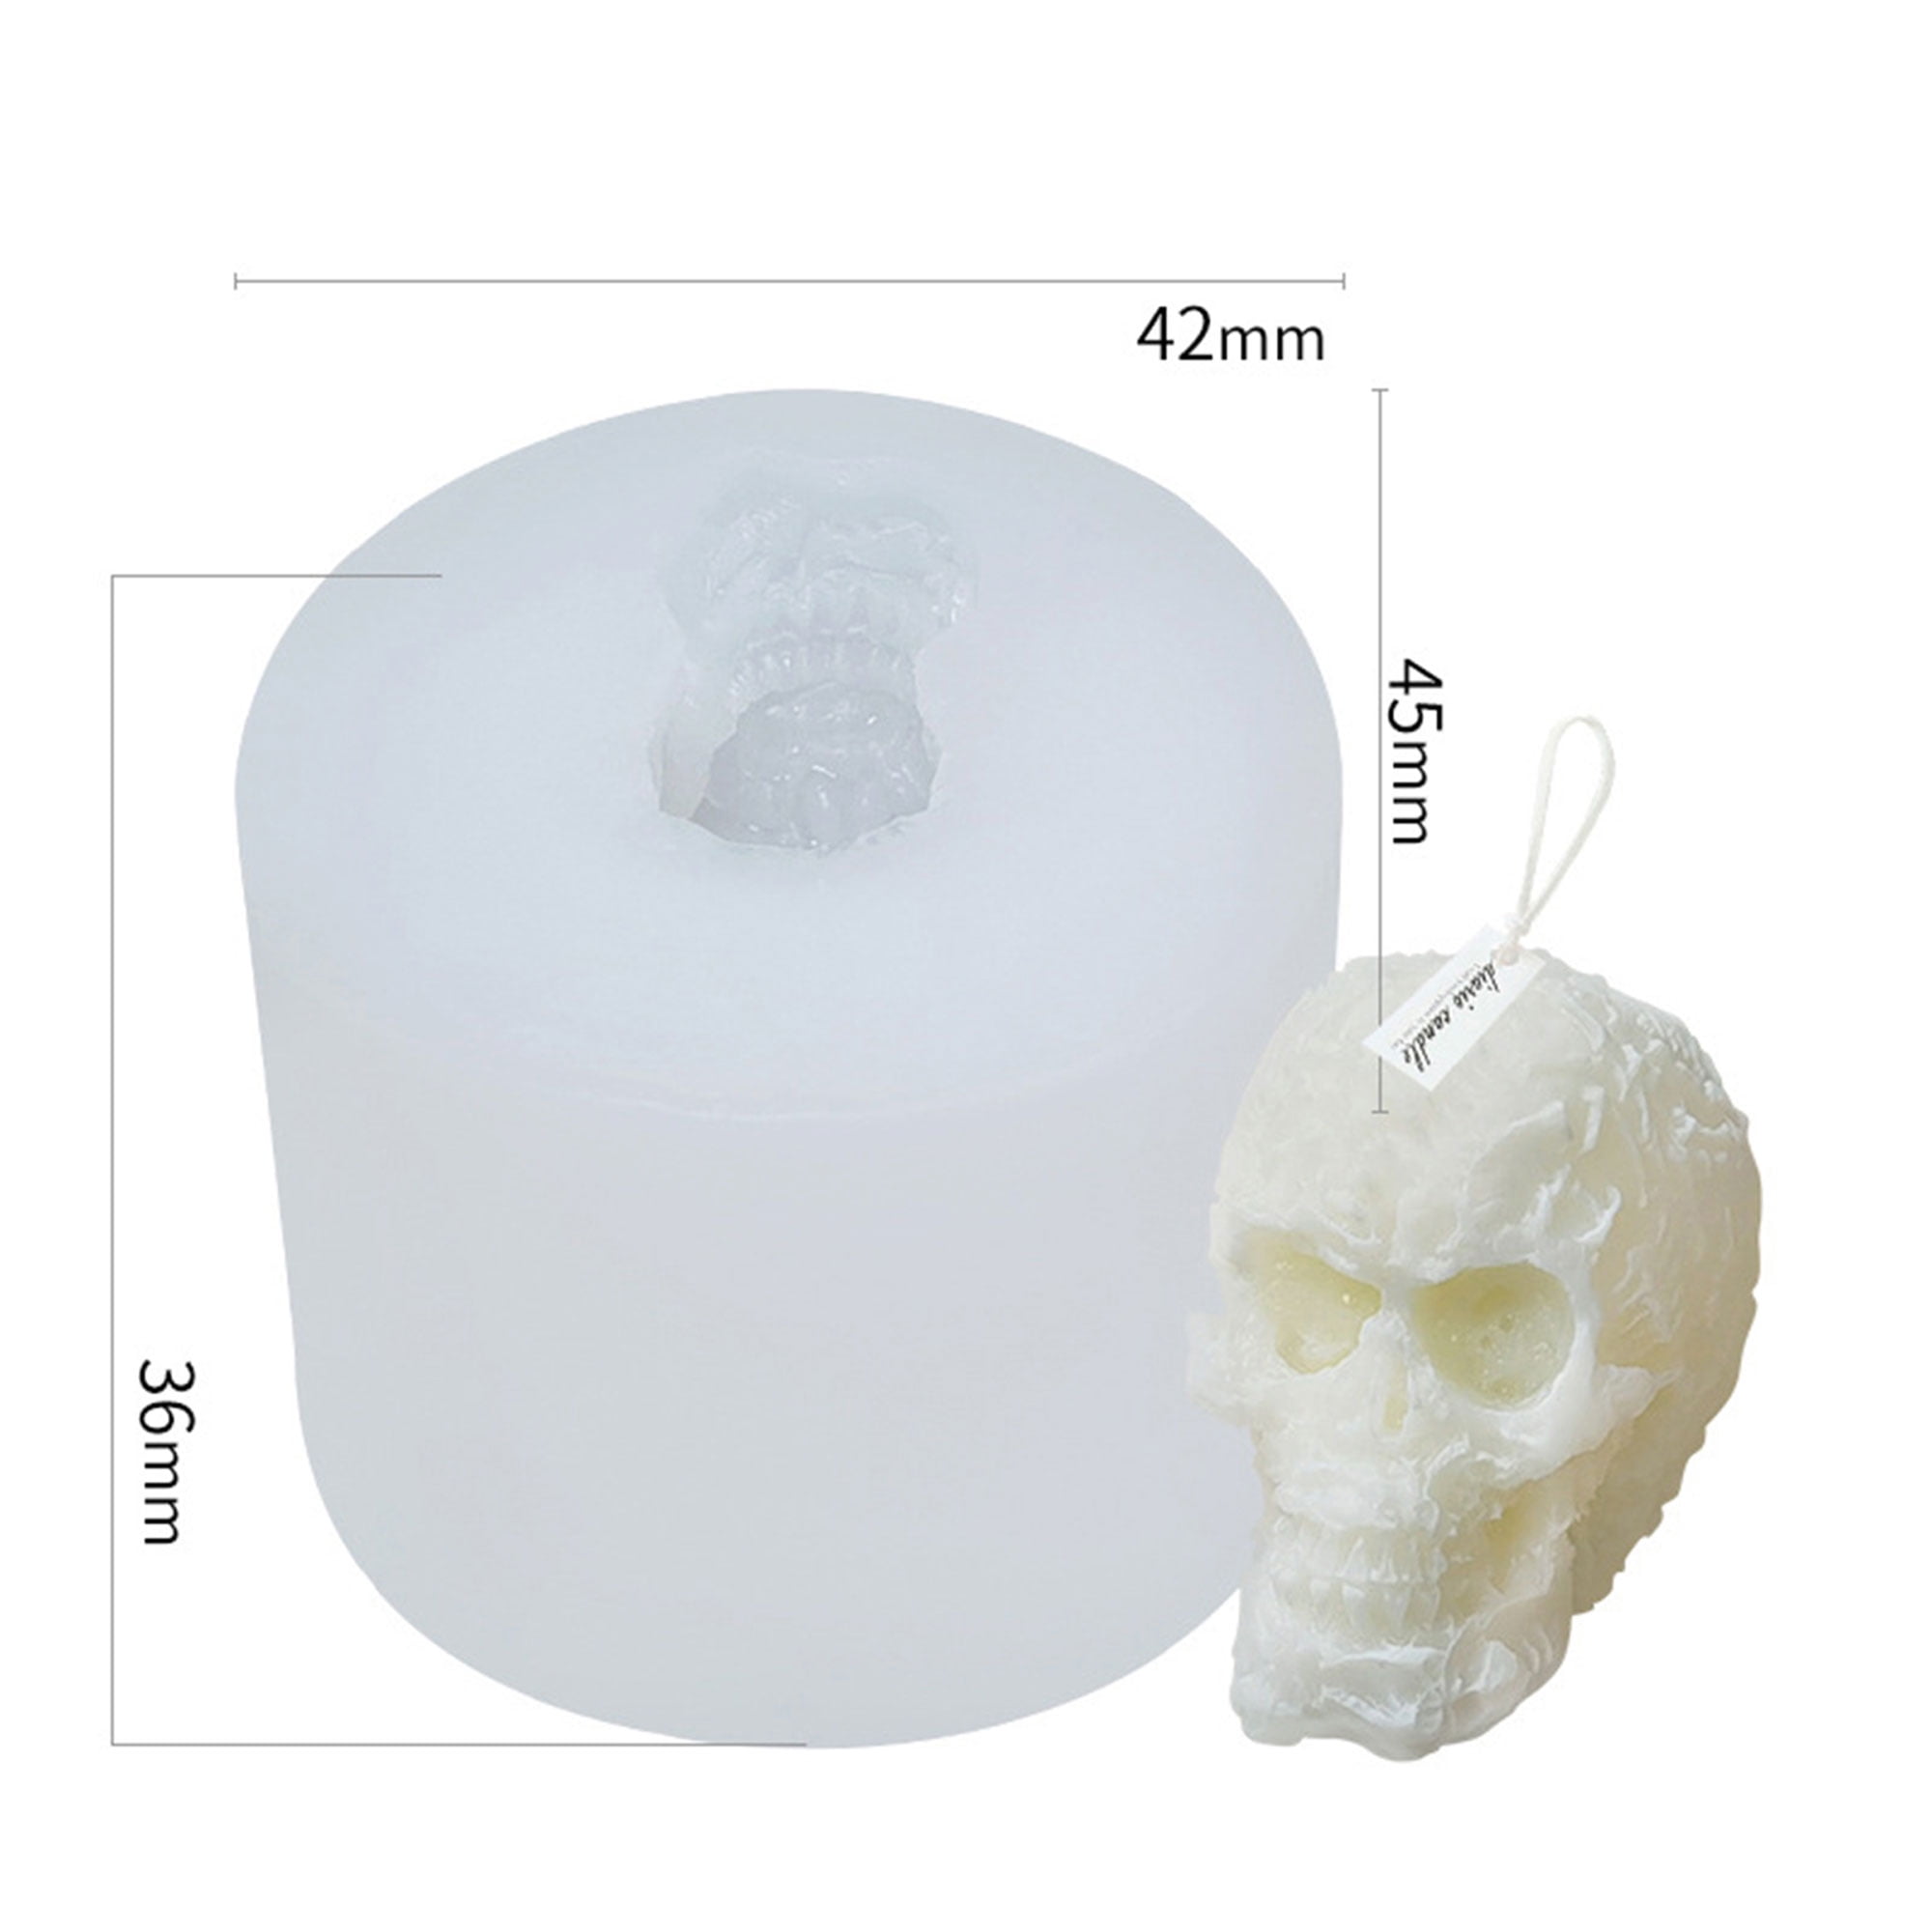 DIY Skull Shape Silicone Candle Making Mold Mould Wax Form Handmade Craft Tool 